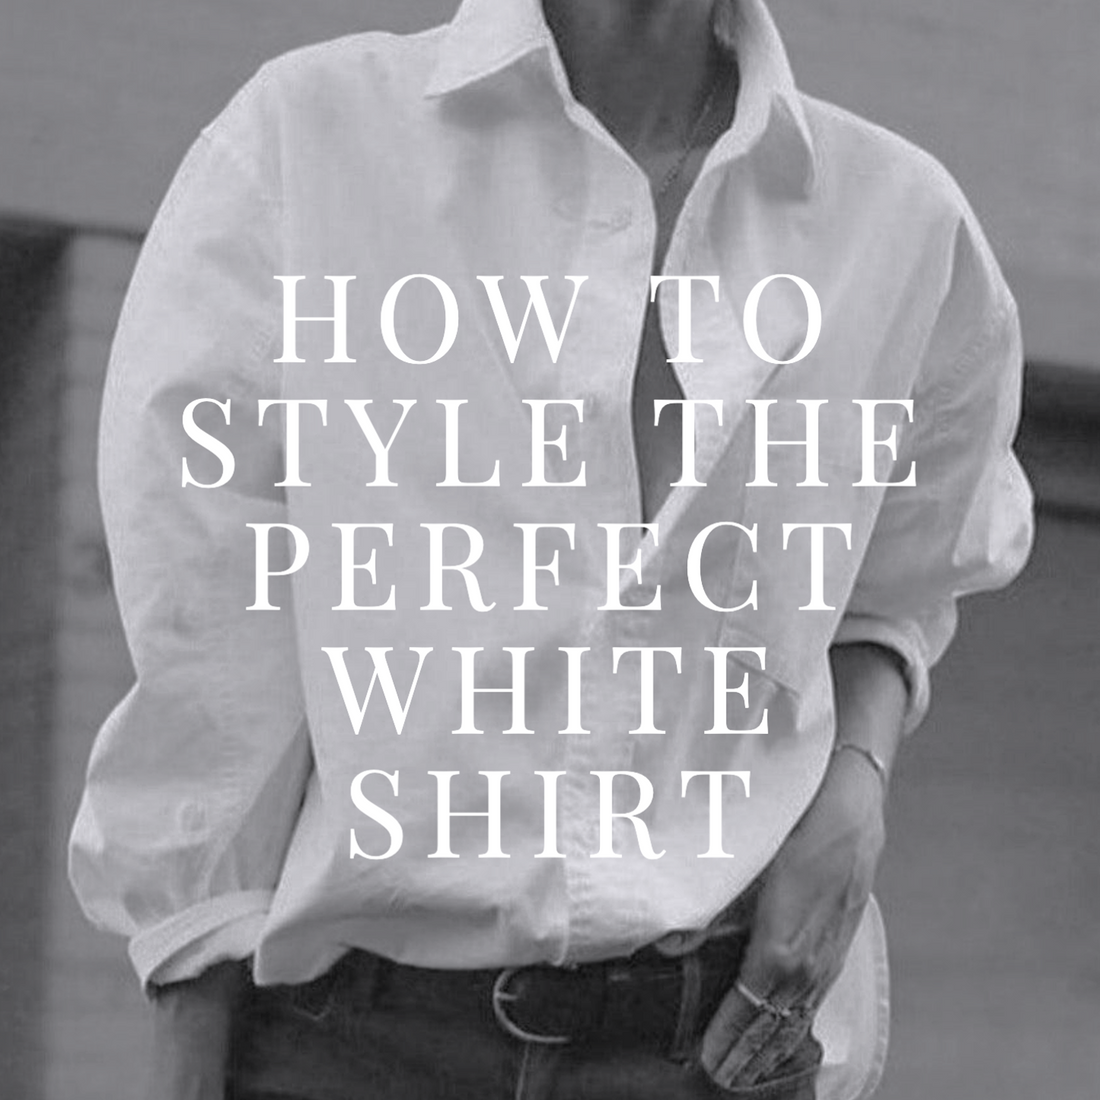 How To Style The Perfect White Shirt